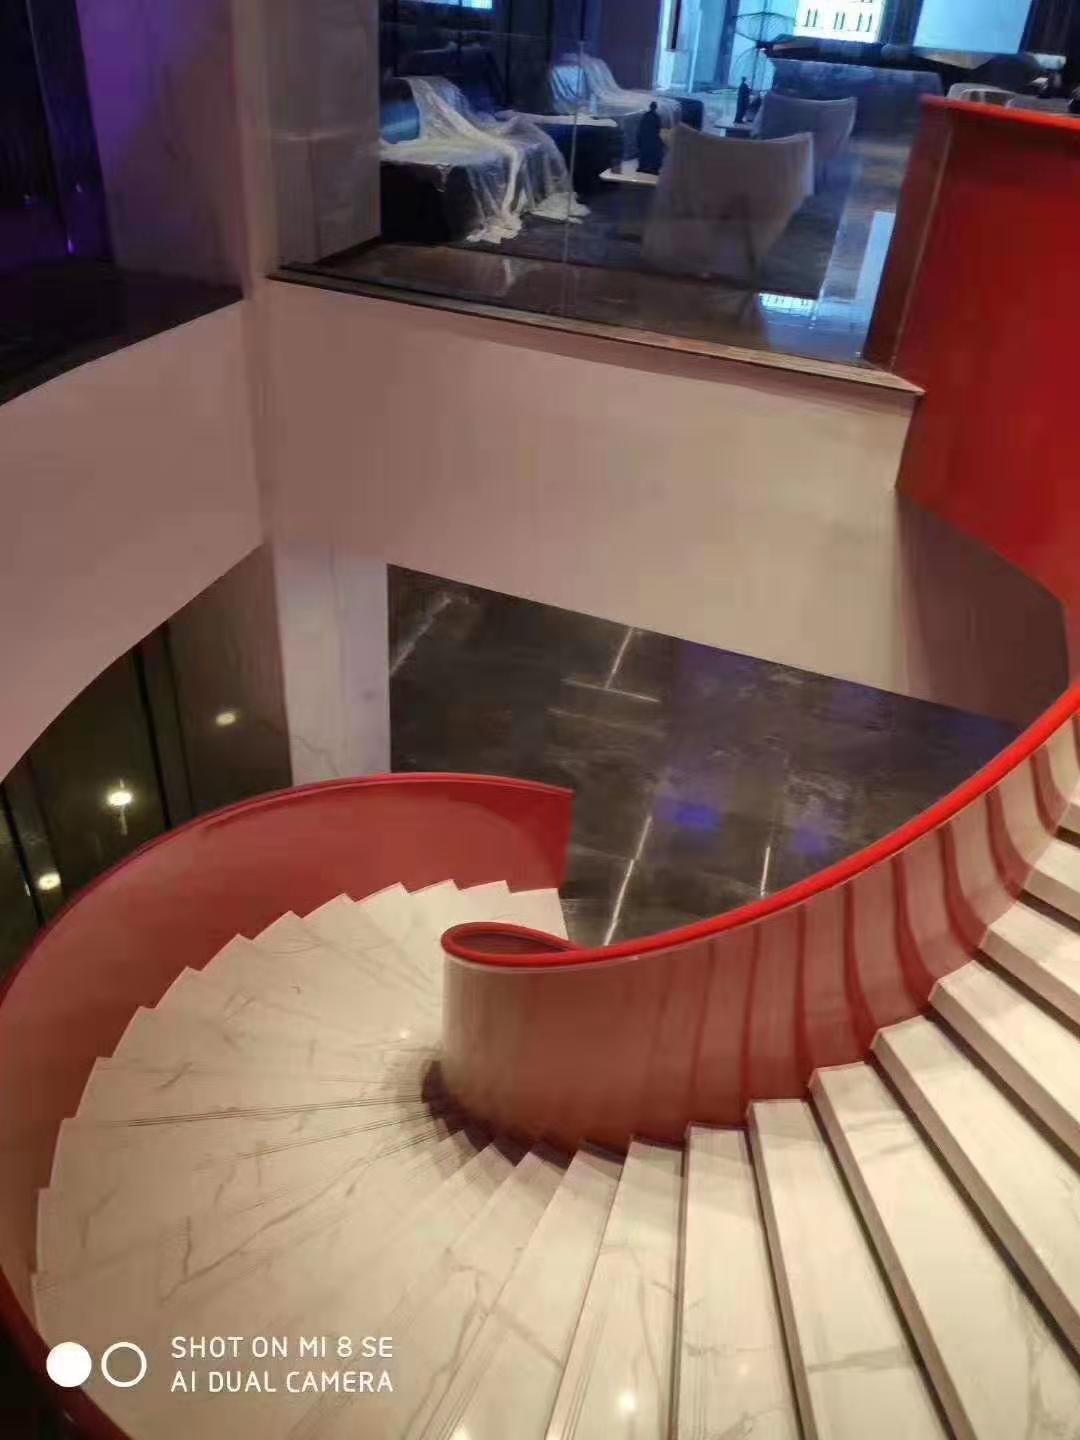 YUDI Stairs curved staircase designs price for indoor